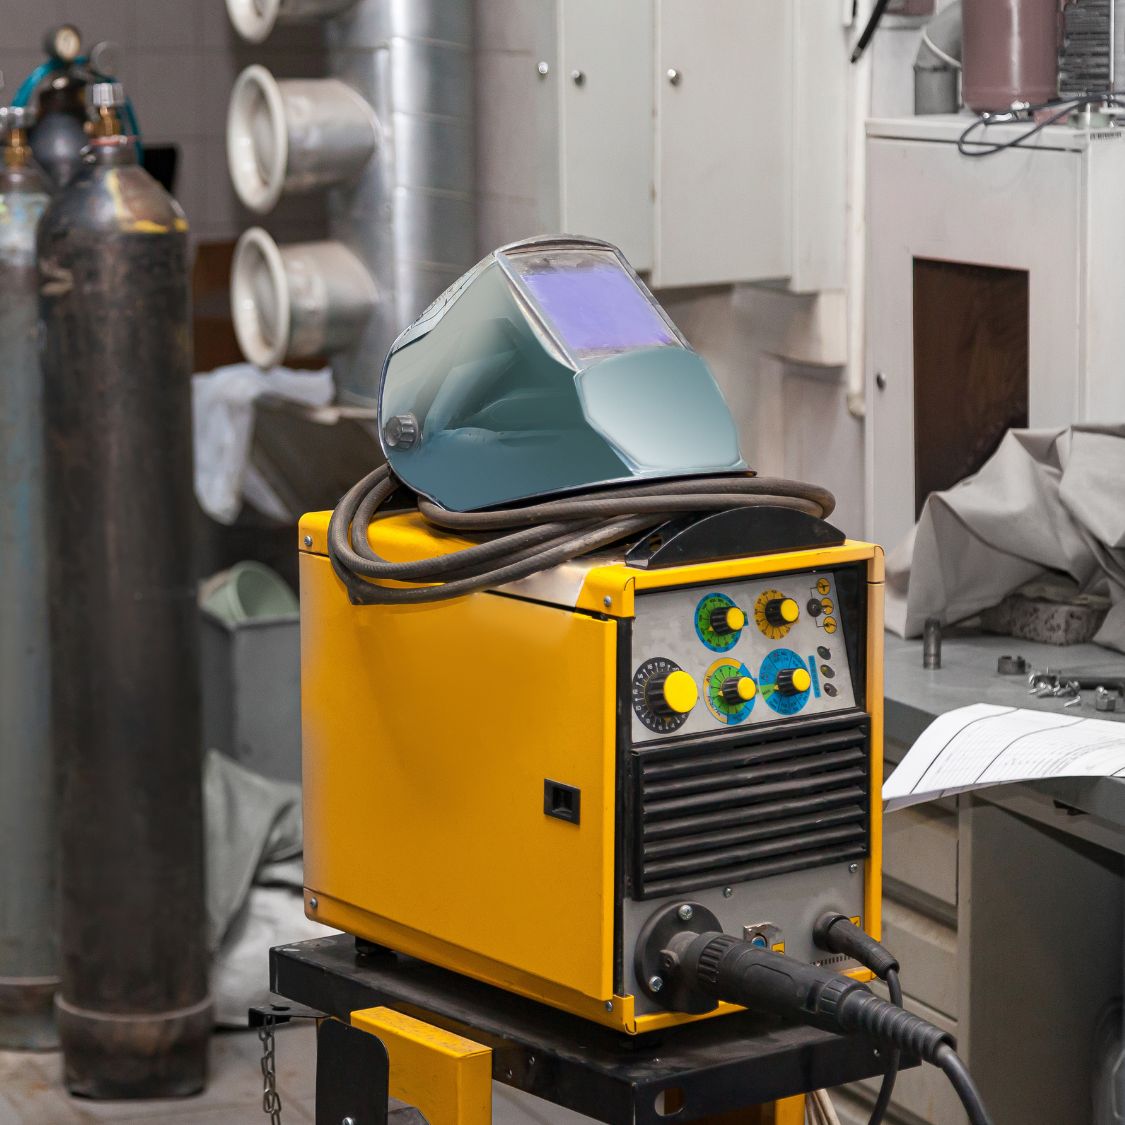 What You Should Know Before Buying a Welding Machine